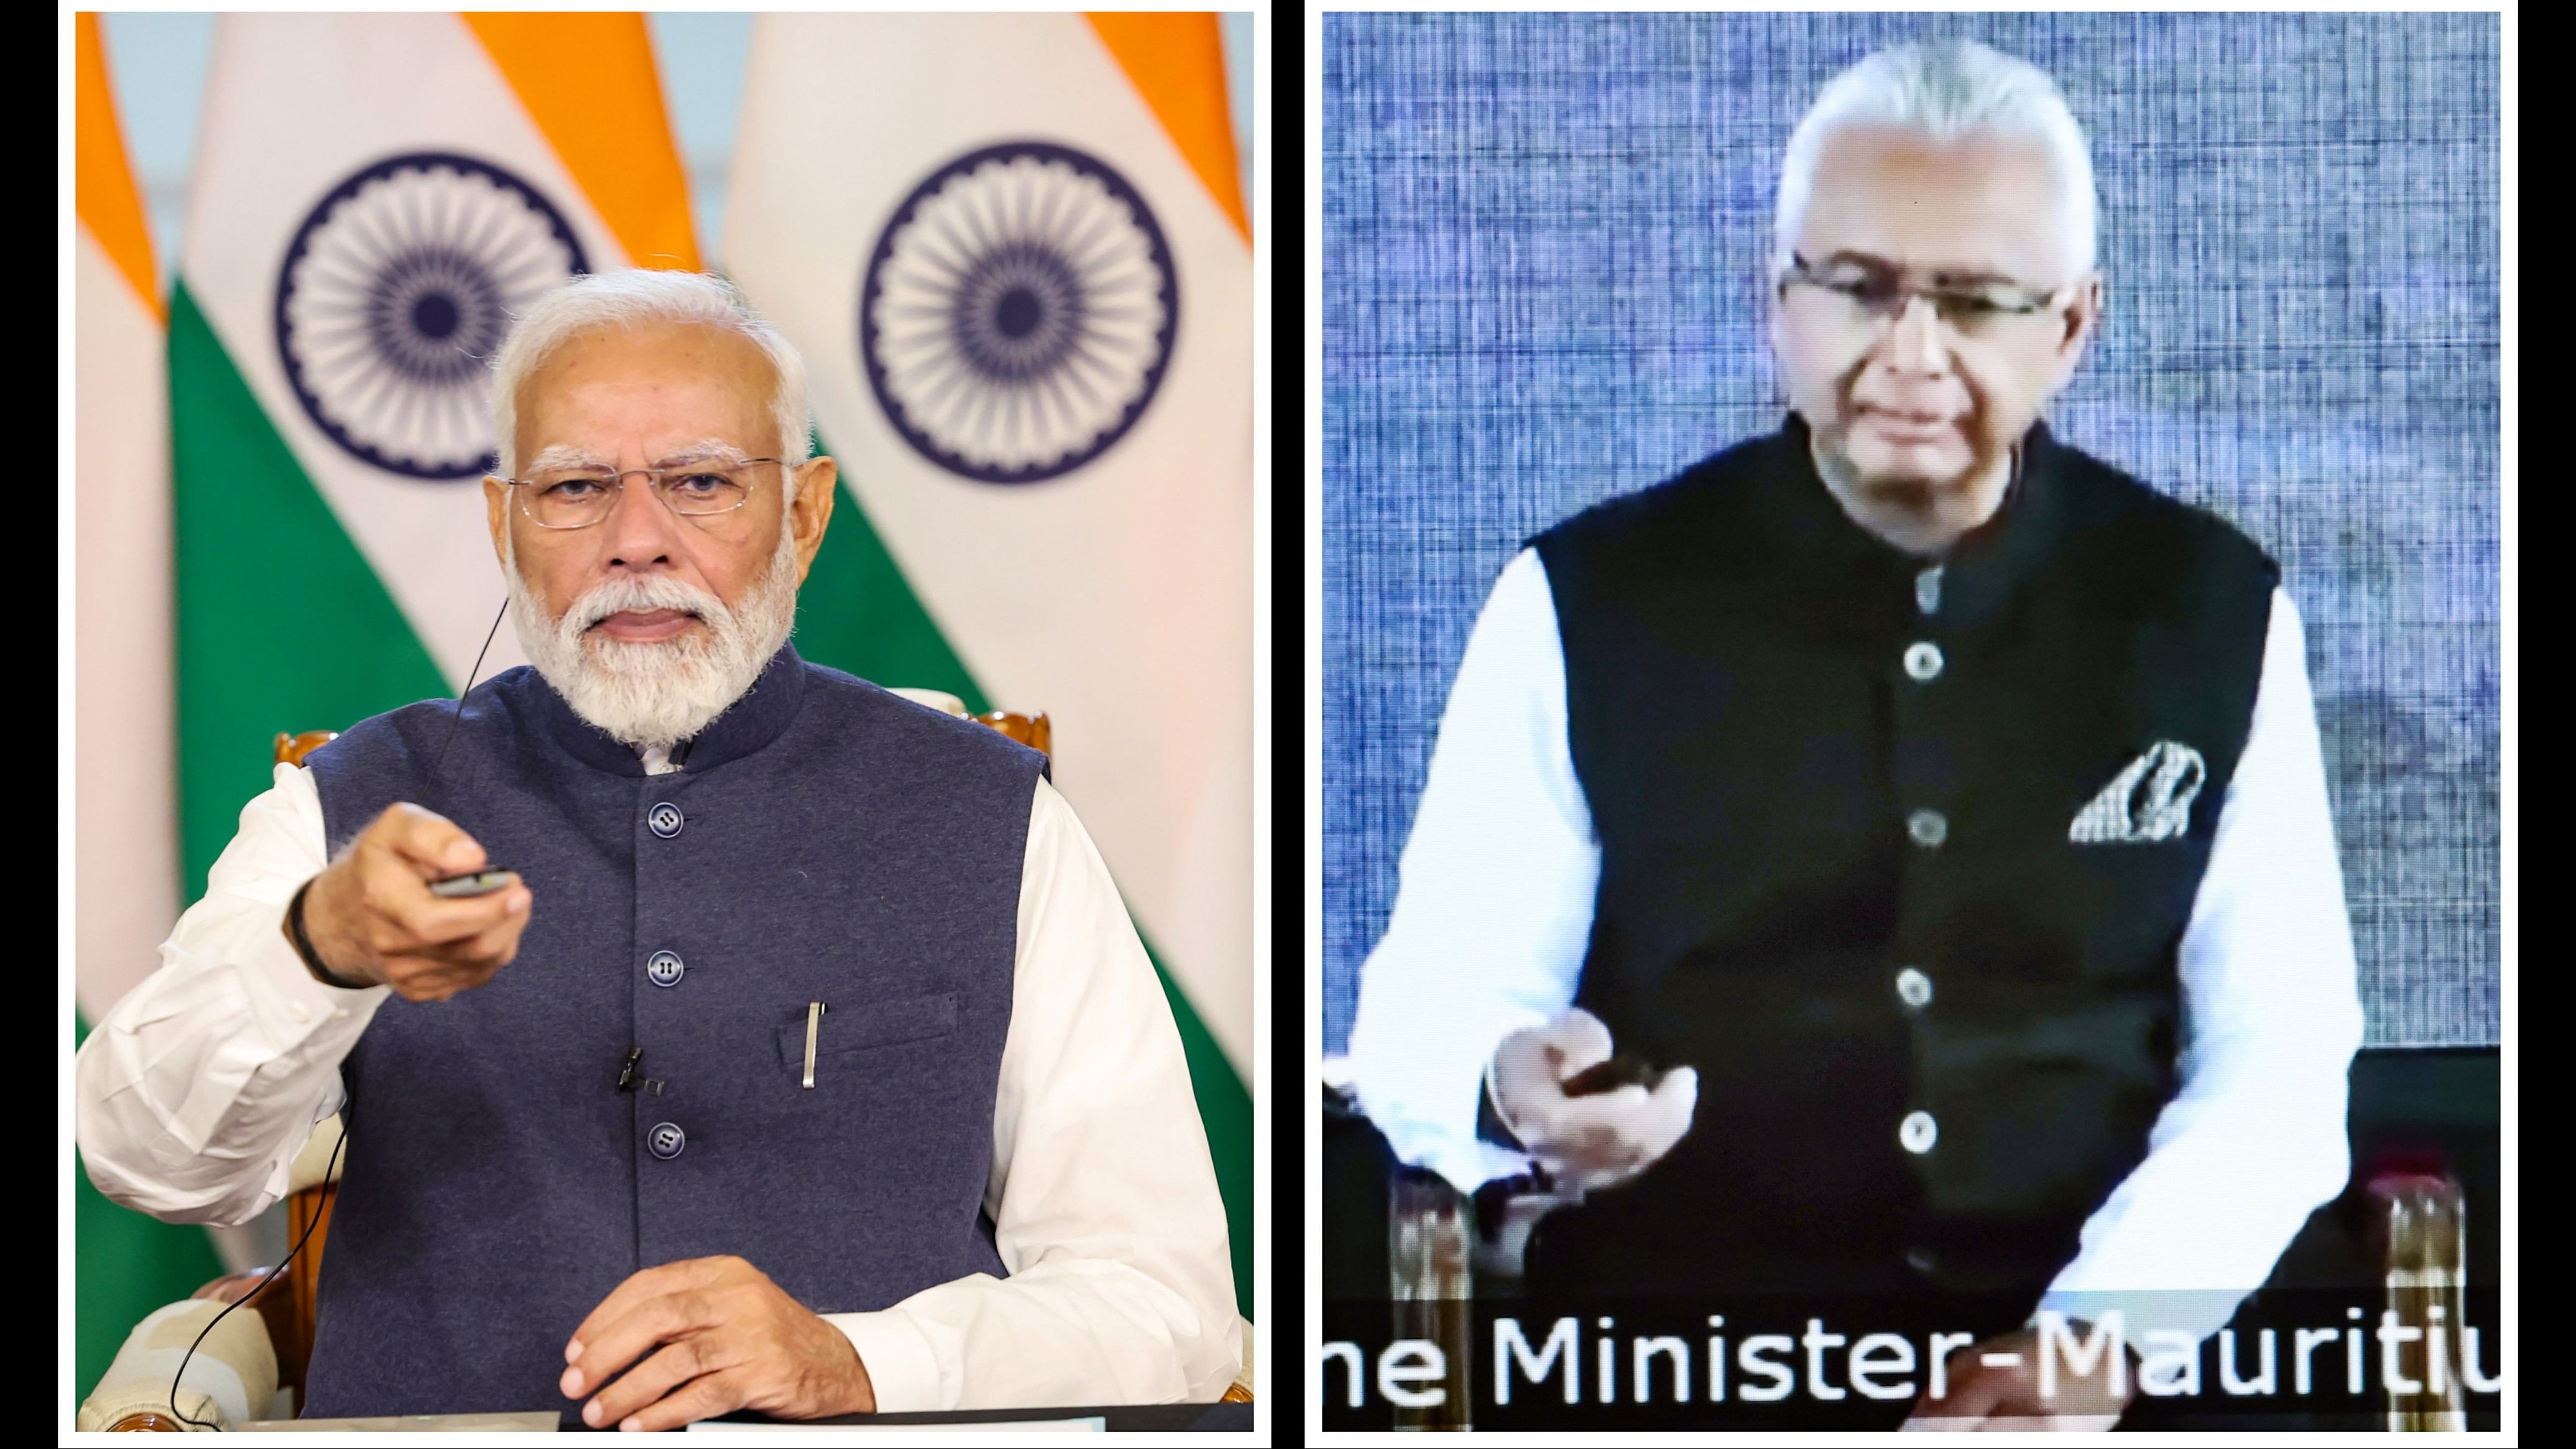 <div class="paragraphs"><p>Prime Minister Narendra Modi and his Mauritian counterpart Pravind Jugnauth jointly inaugurate several India-assisted development projects at the Agalega Island in Mauritius, via a video conference.</p></div>